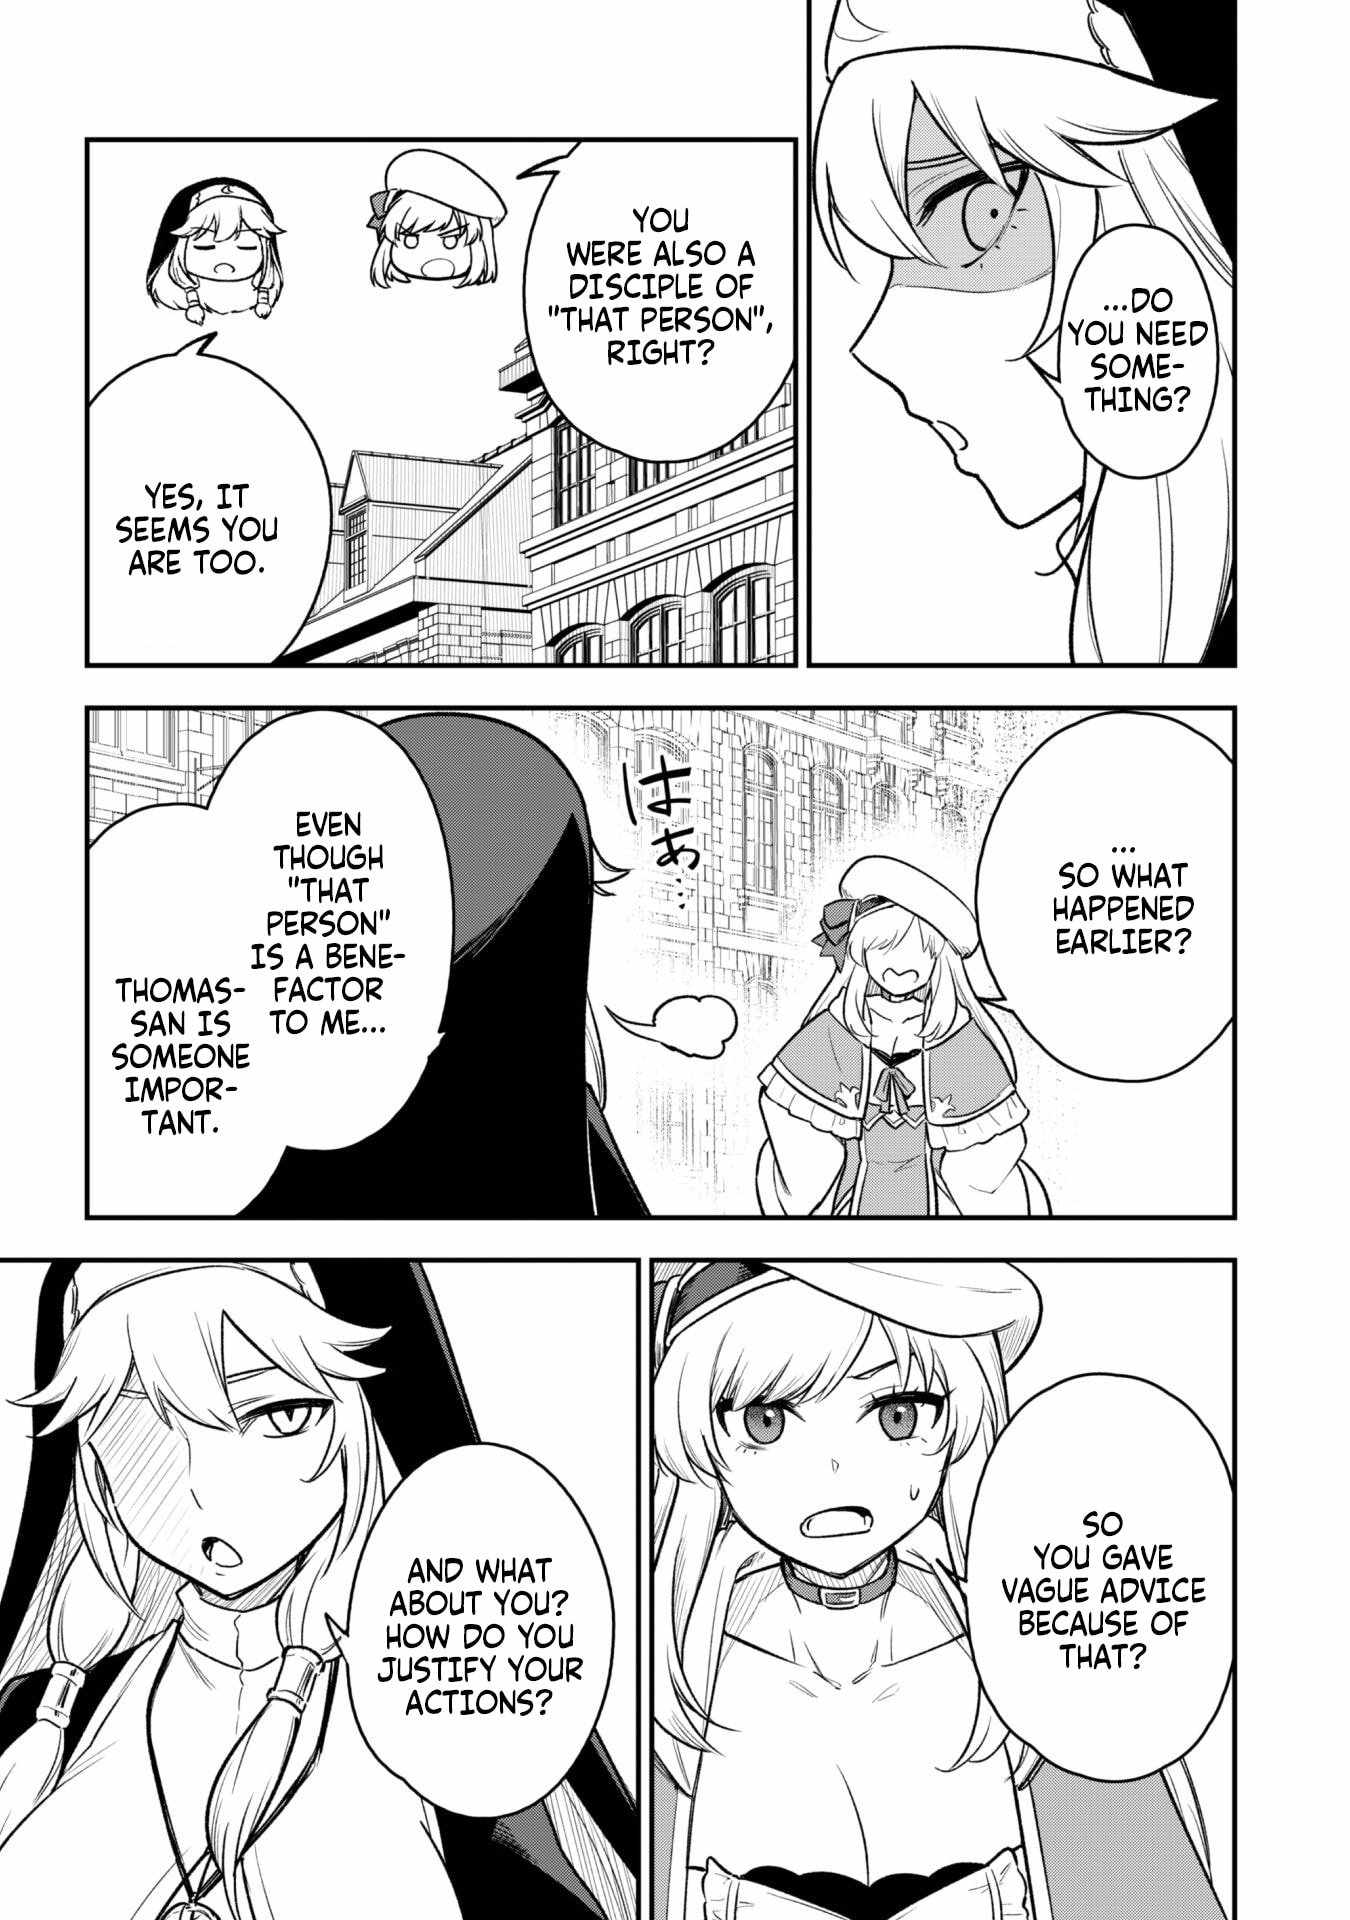 The White Mage Who Joined My Party Is a Circle Crusher, So My Isekai Life Is at Risk of Collapsing Once Again Chapter 12-2-eng-li - Page 10